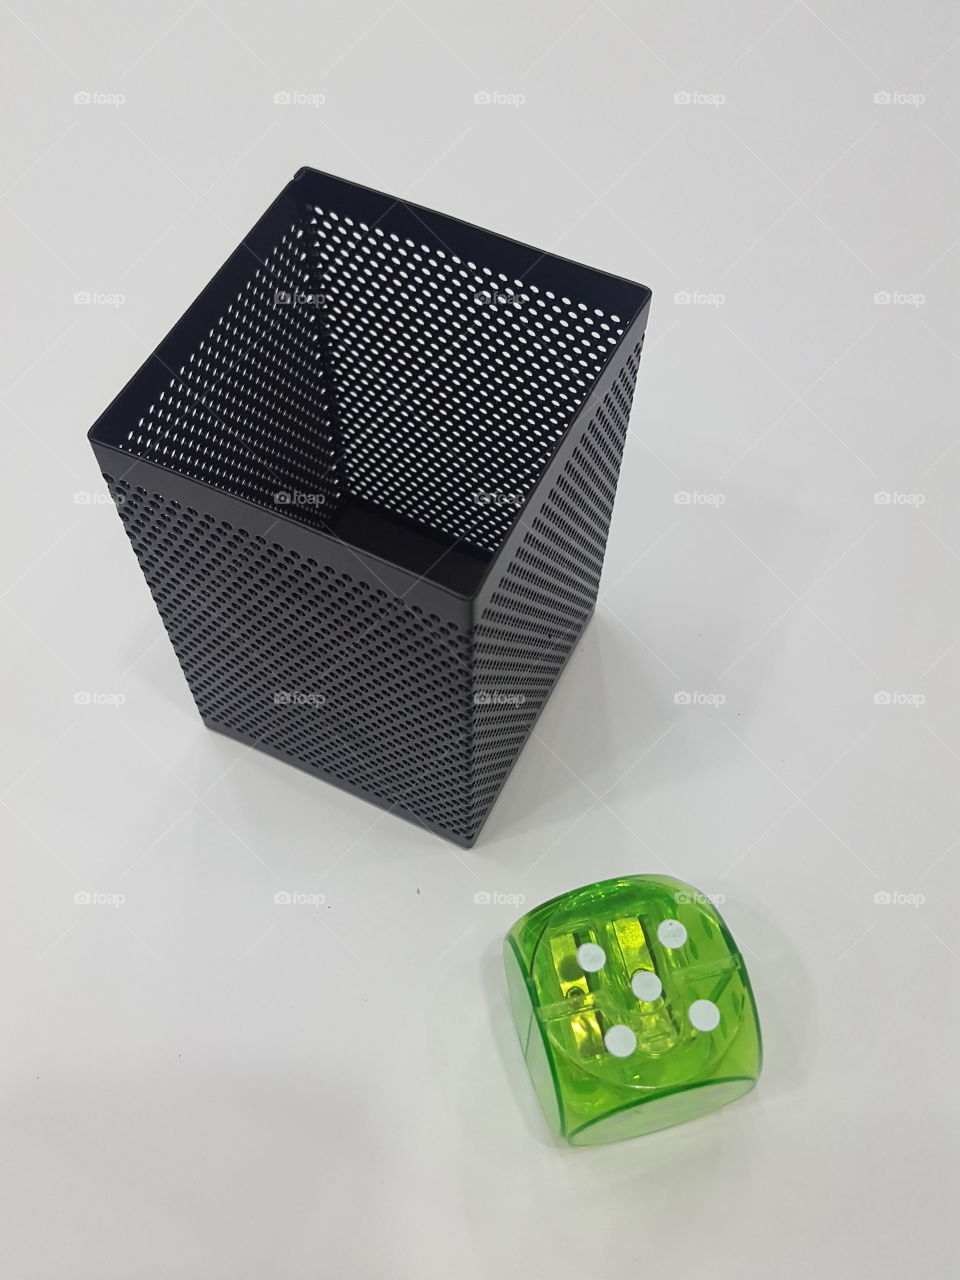 Black perforated metal pen stand with green dice themed pencil sharpner